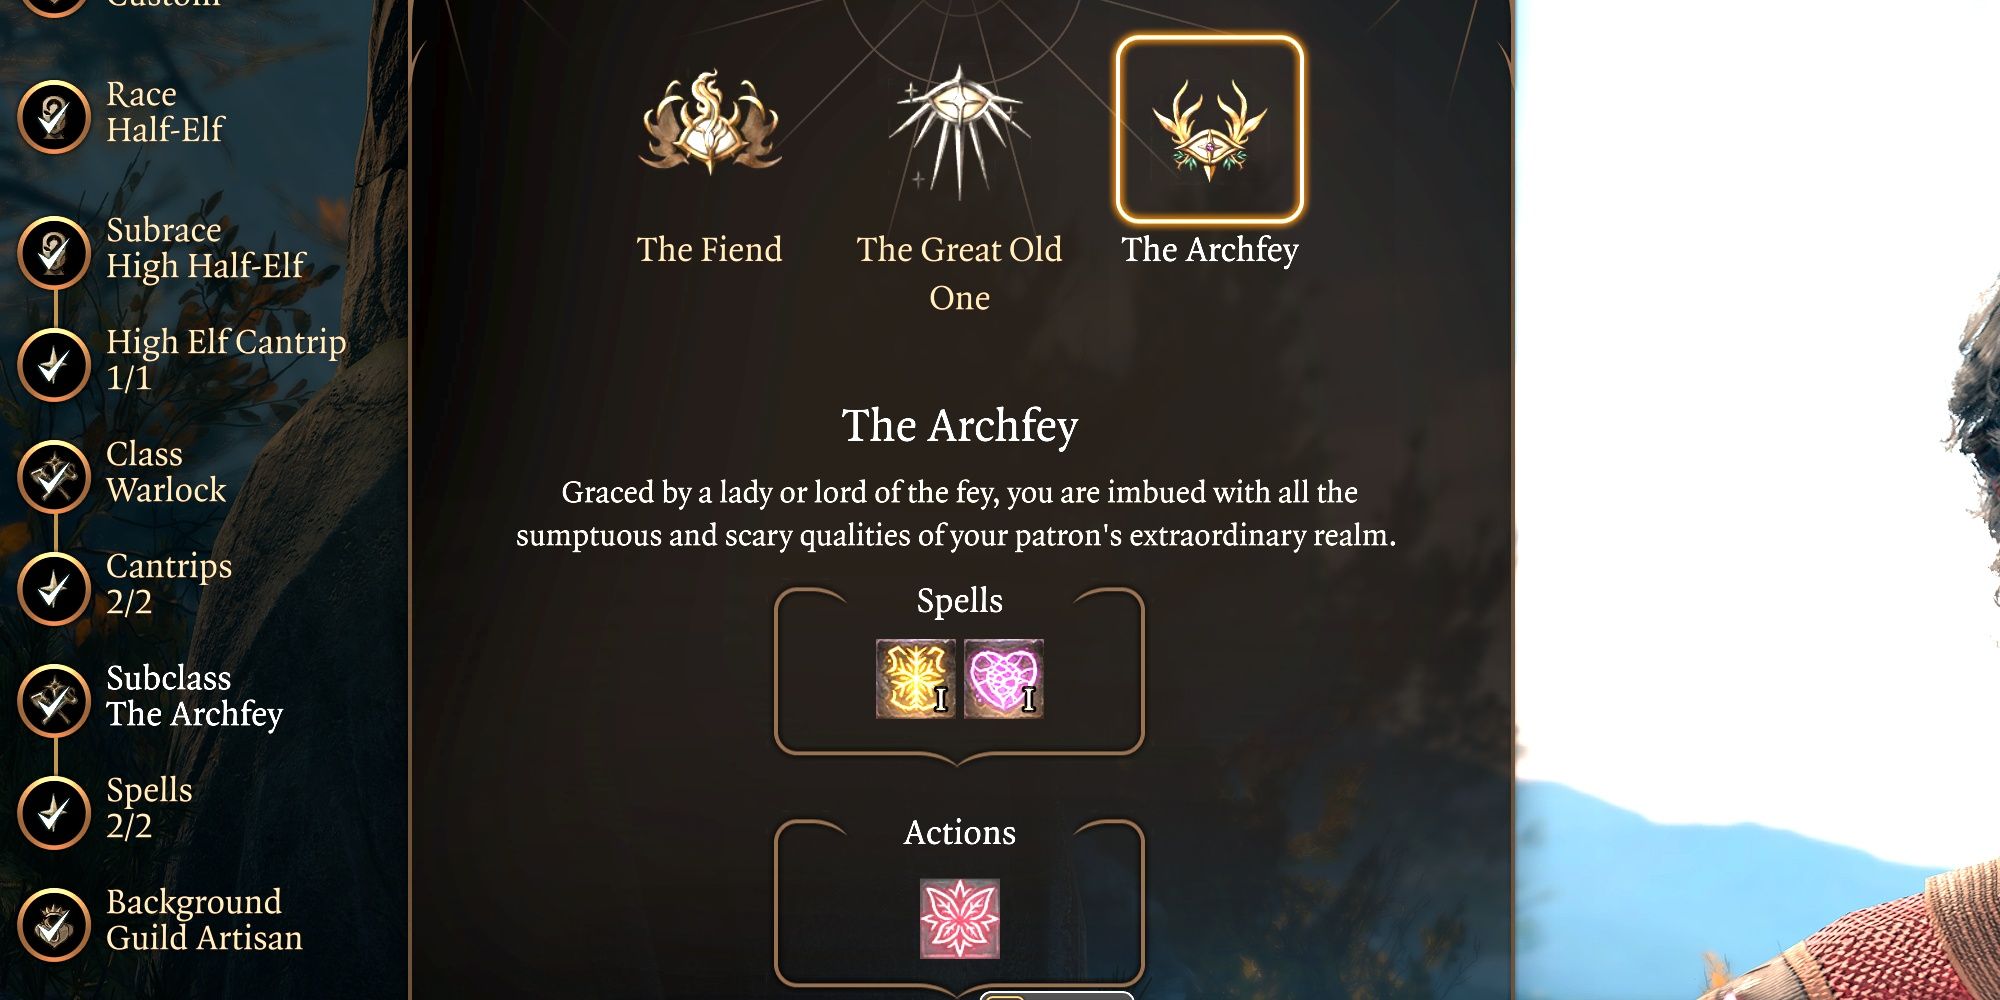 BG3 Warlock Subclasses are shown with the Archfey selected for greater crowd control